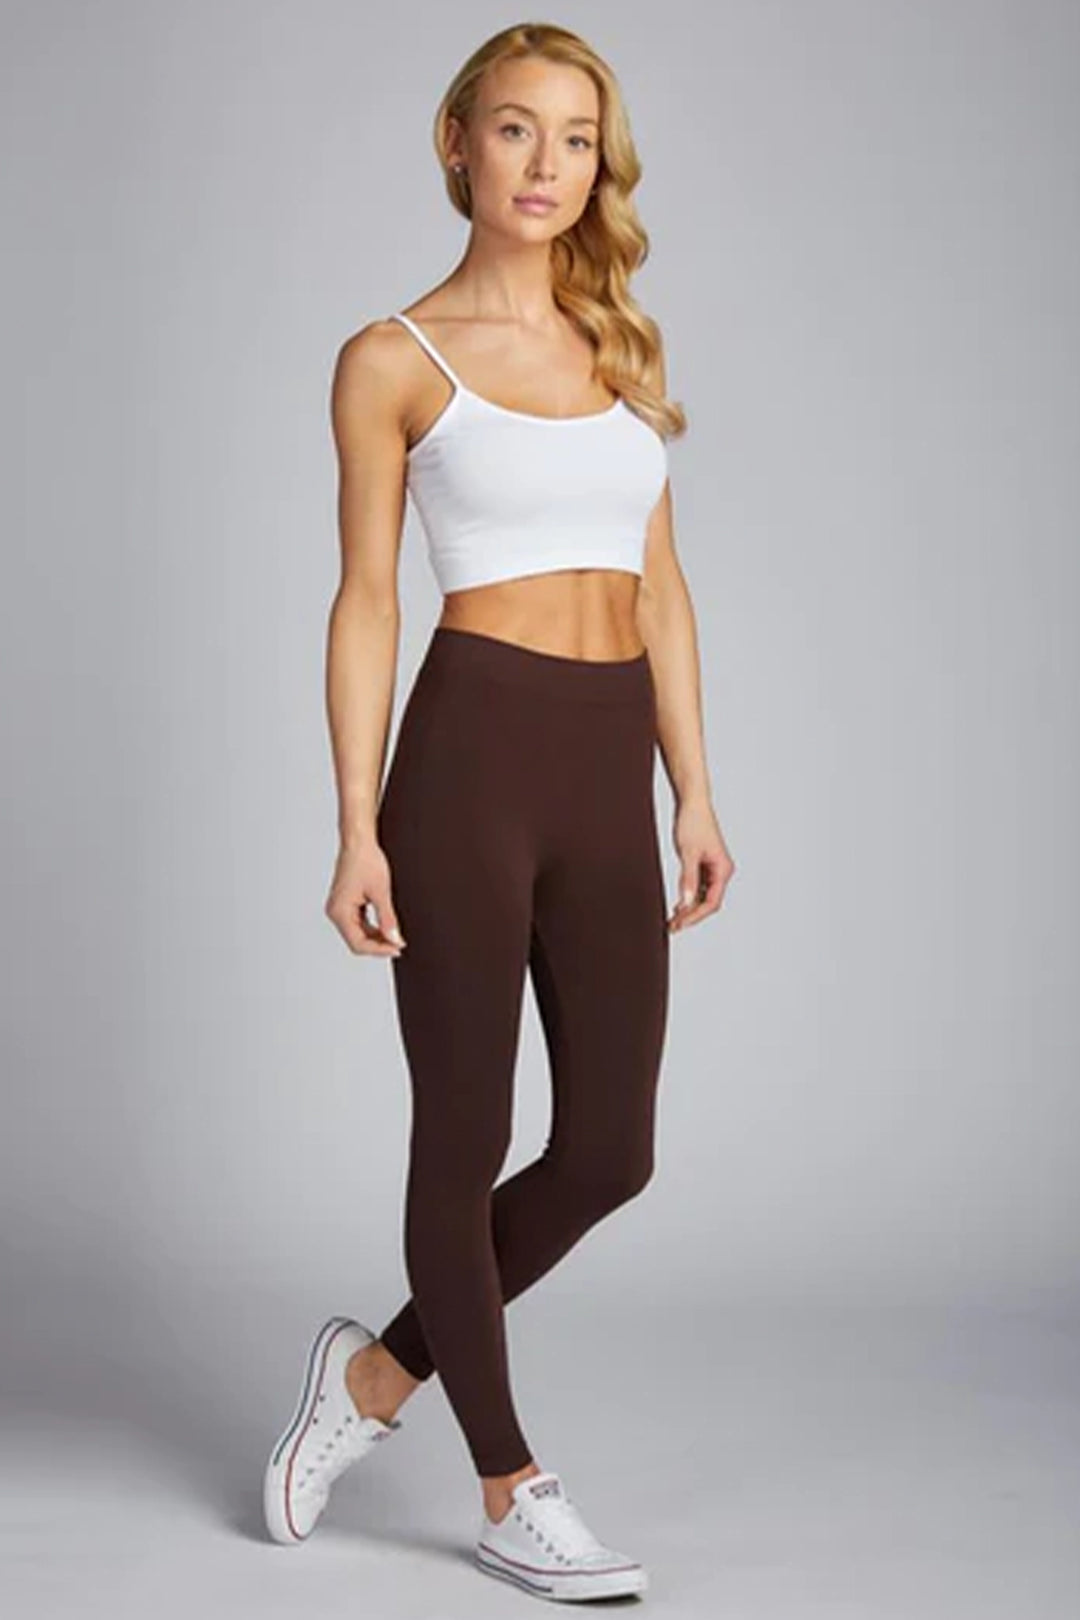 They feature soft, breathable heathered fabric, a pull-on elastic waistband and present a seamless style when layered.